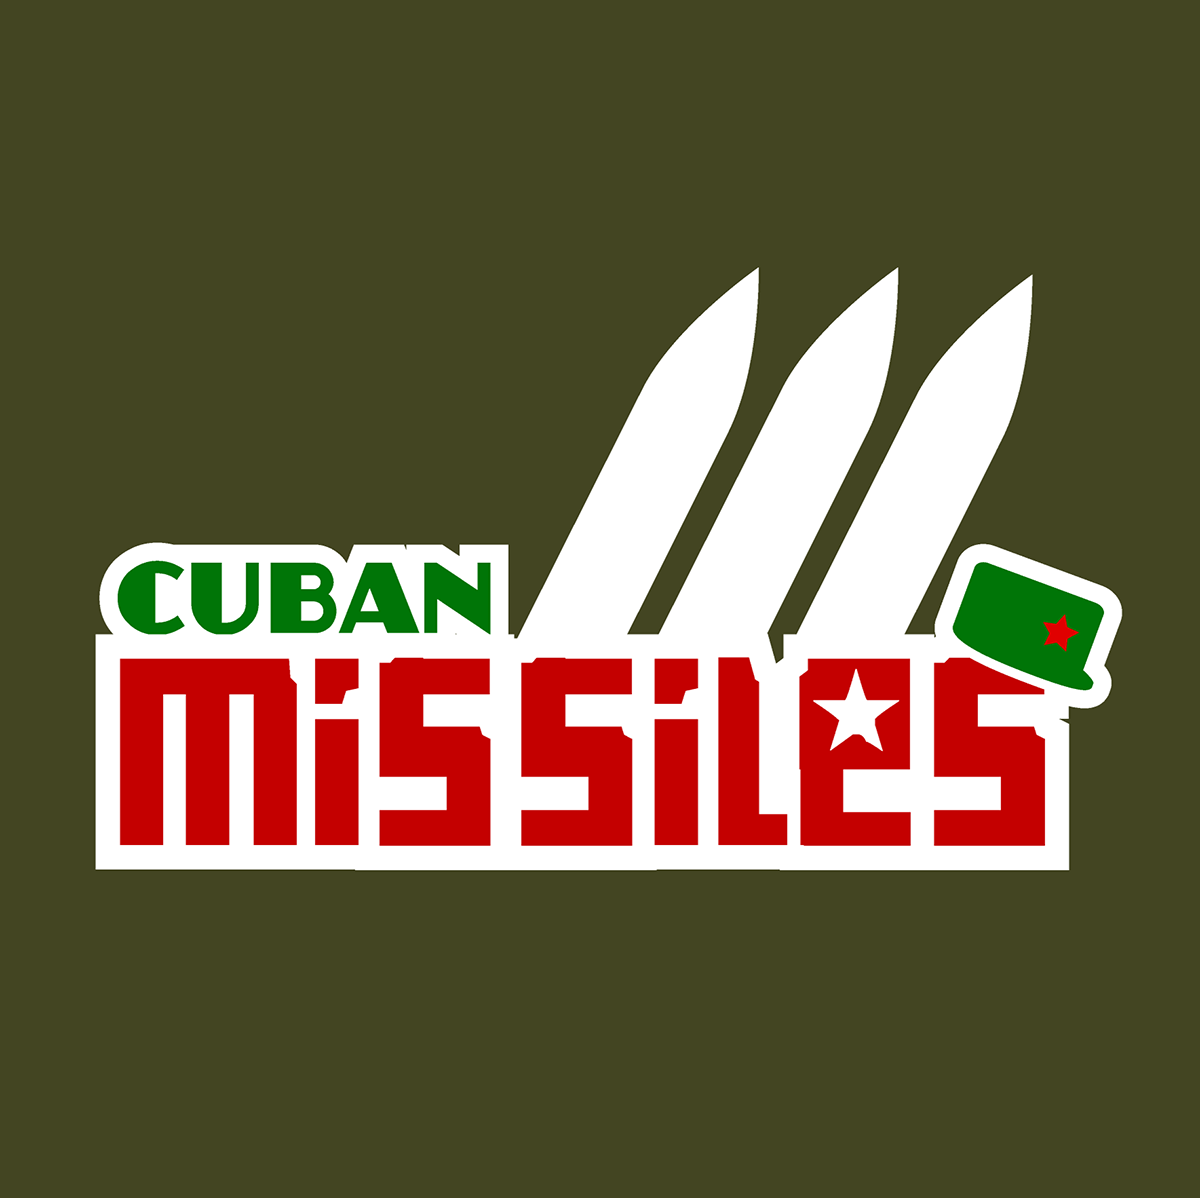 Missile Red Logo - The Cuban Missiles shirt from The History League